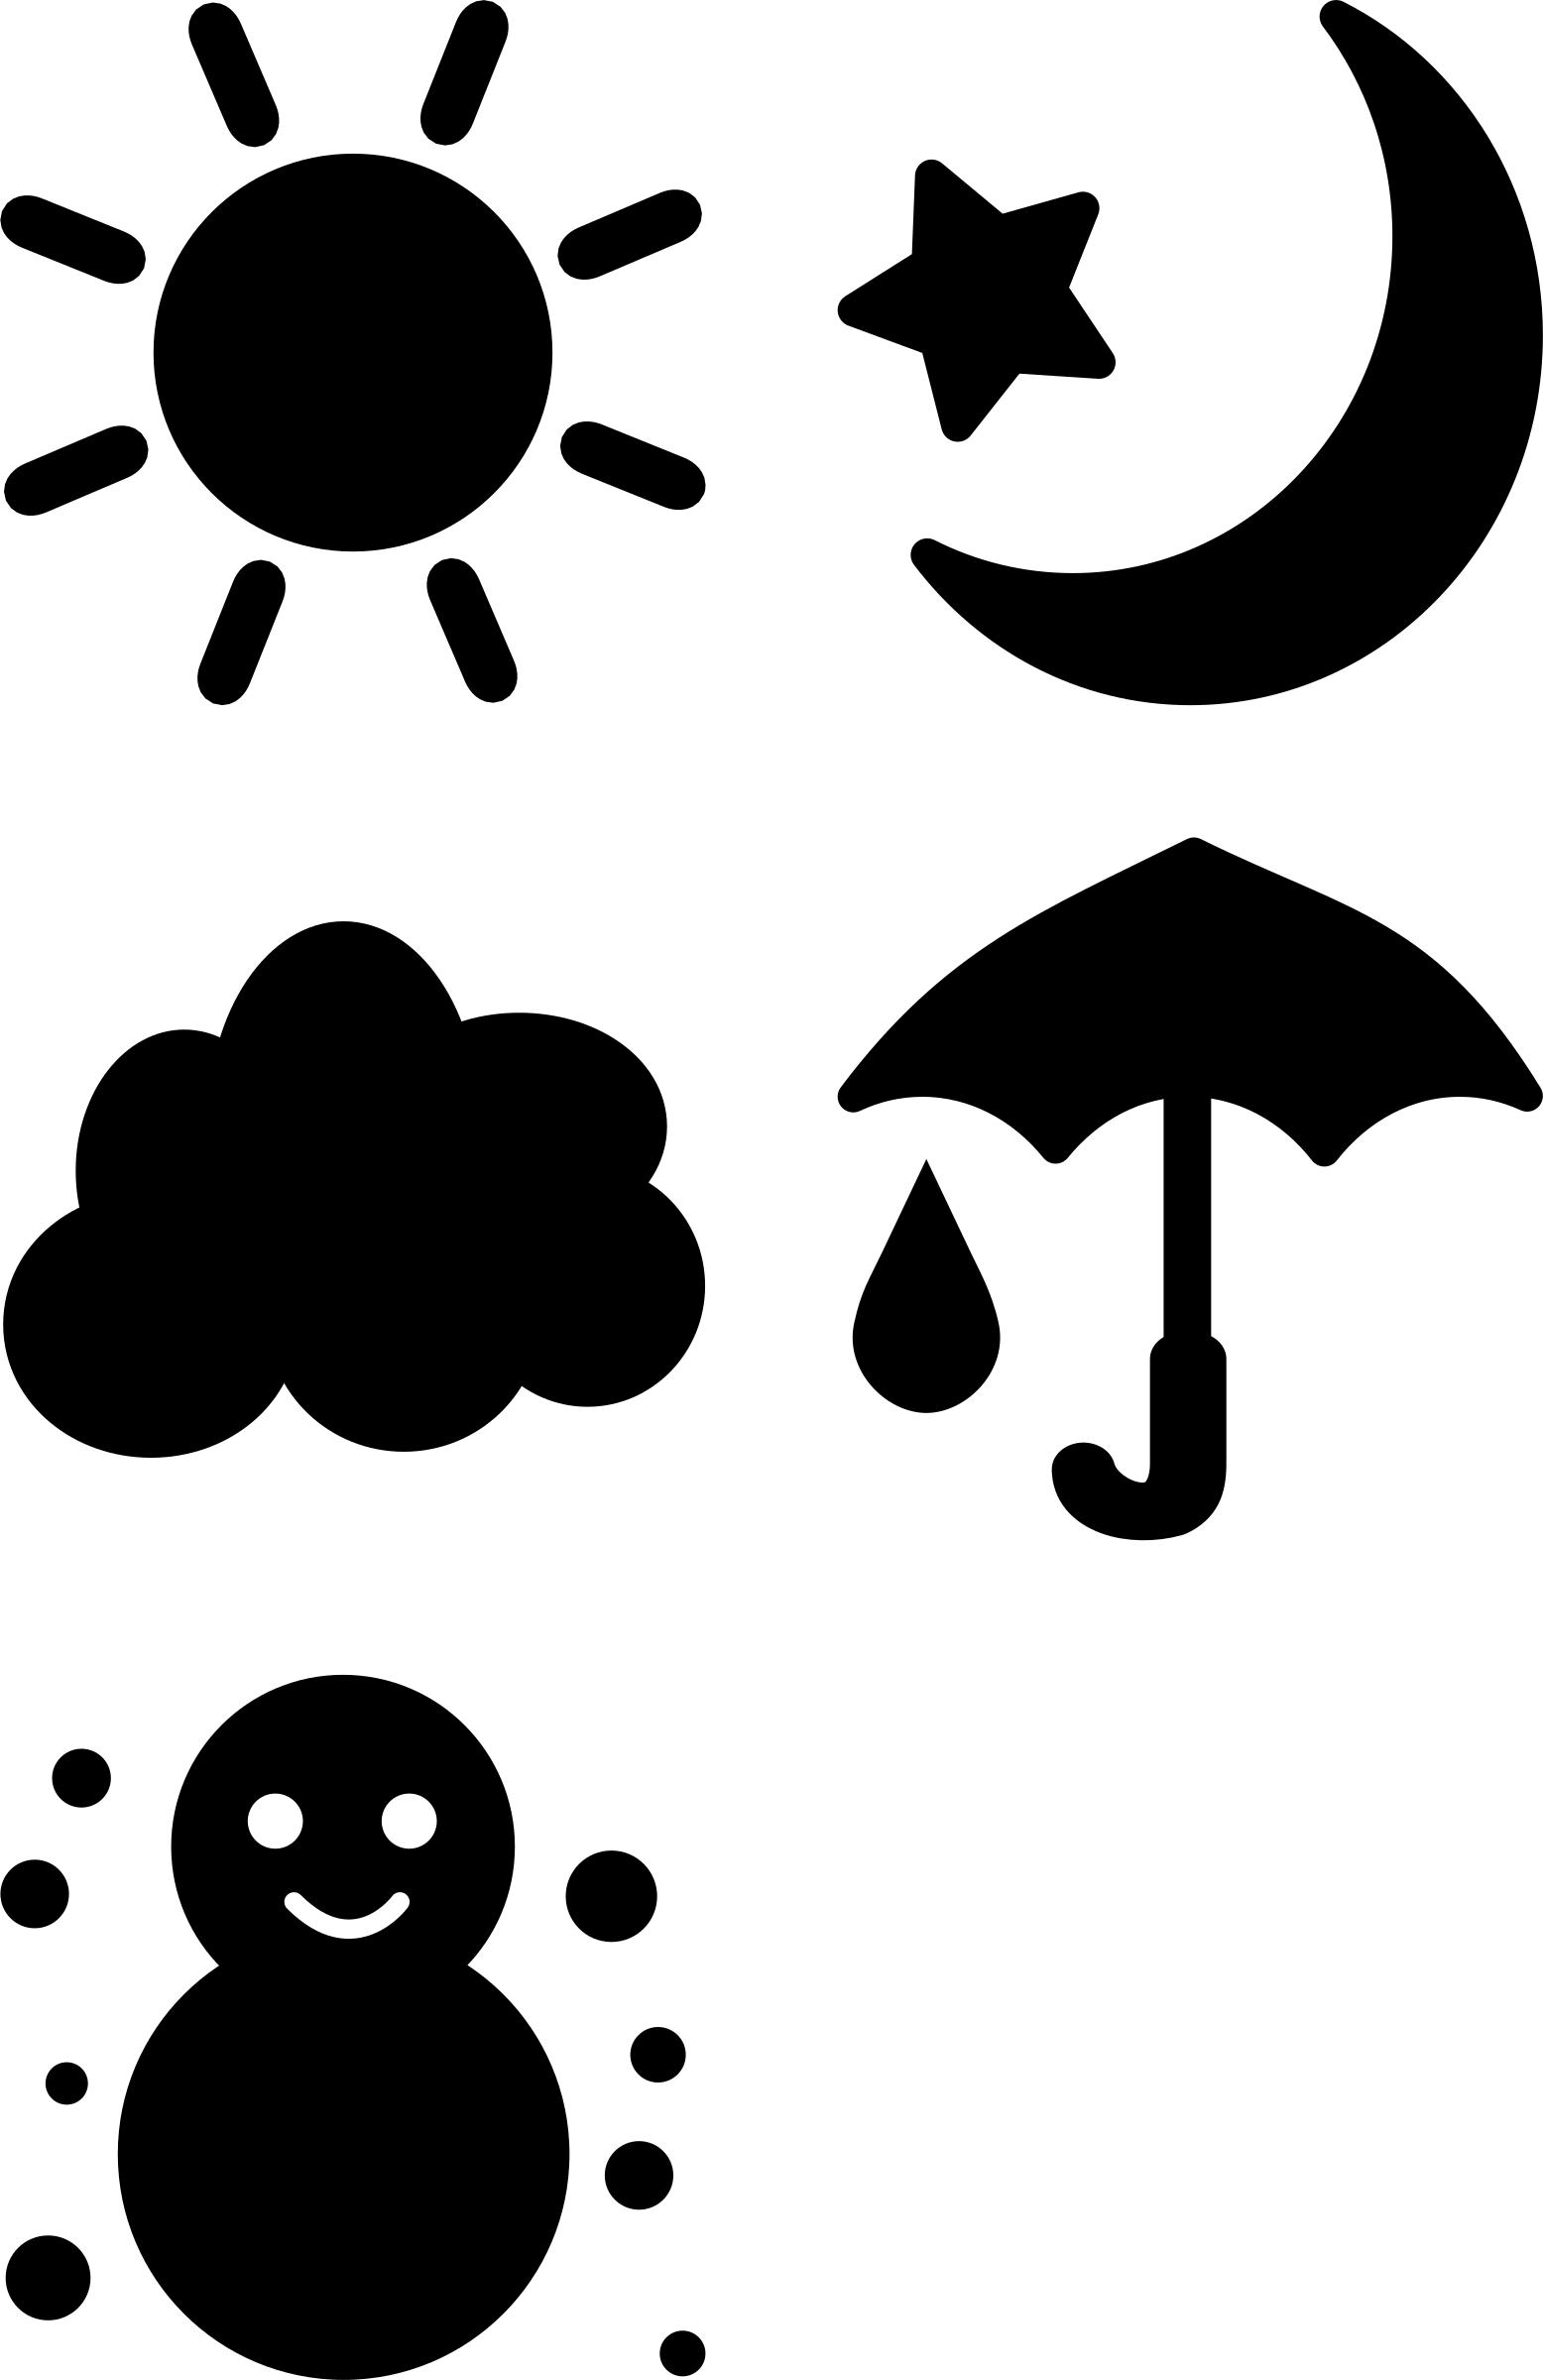 5 Types of Weather Pictograms png